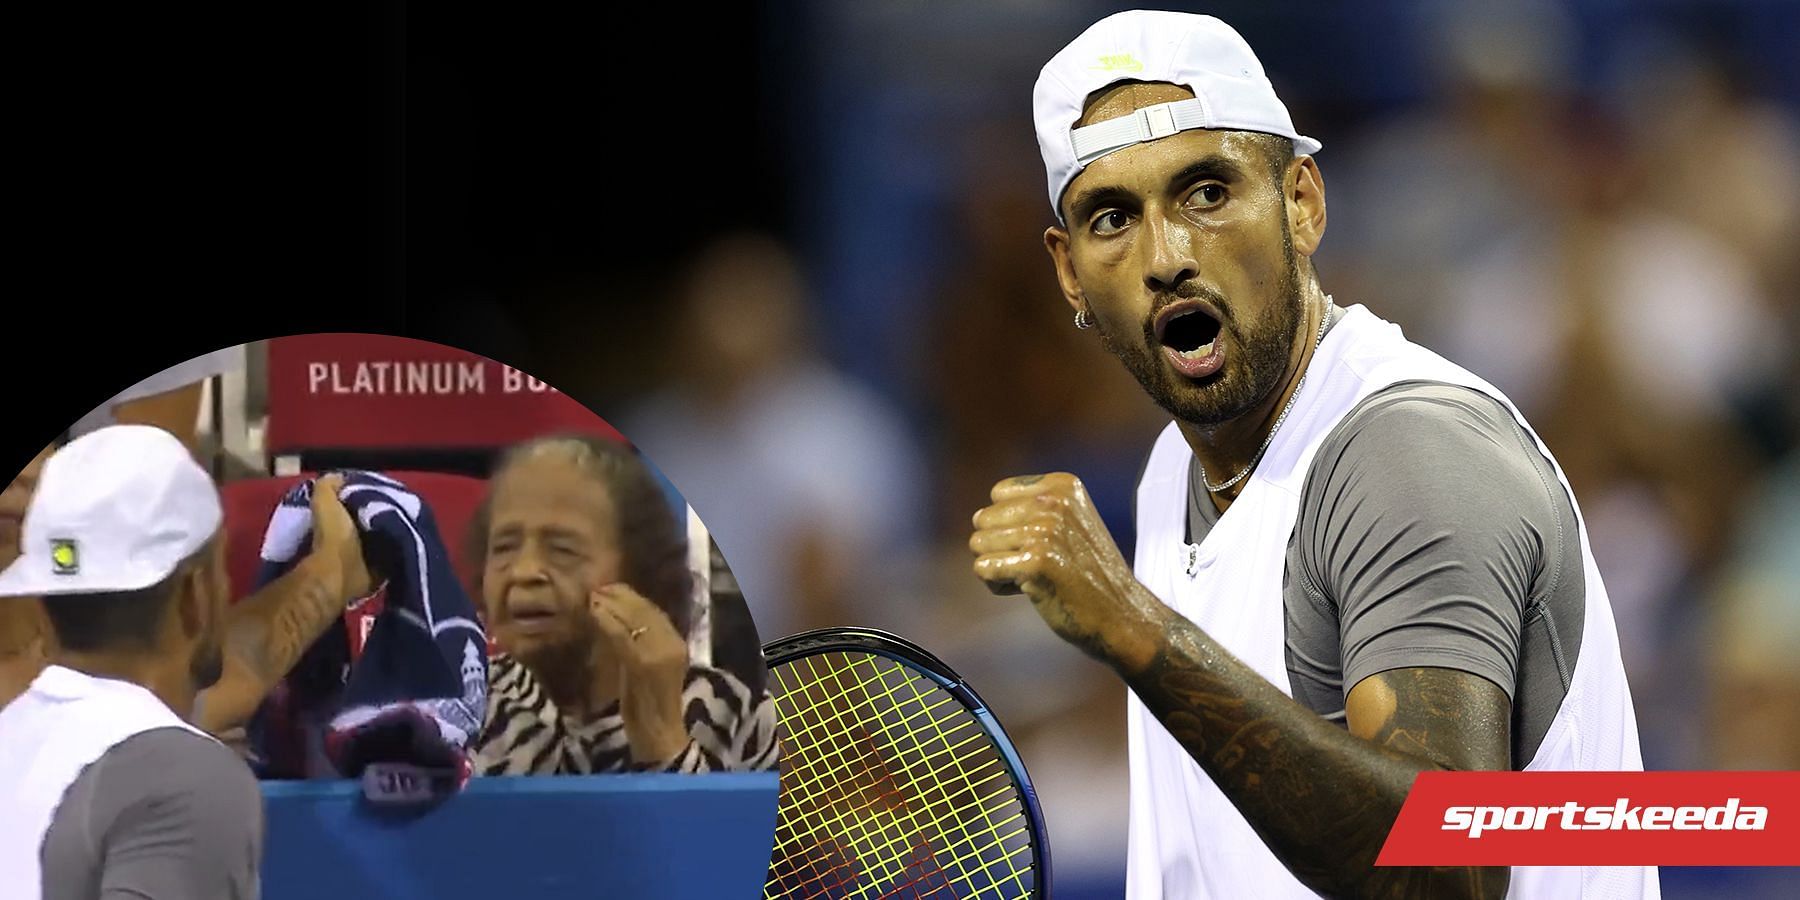 Nick Kyrgios makes up for an errant bounce of his backhand shot that hit an elderly fan by giving her his towel (Insert: Screenshot from Tennis TV&#039;s video clip on Twitter).